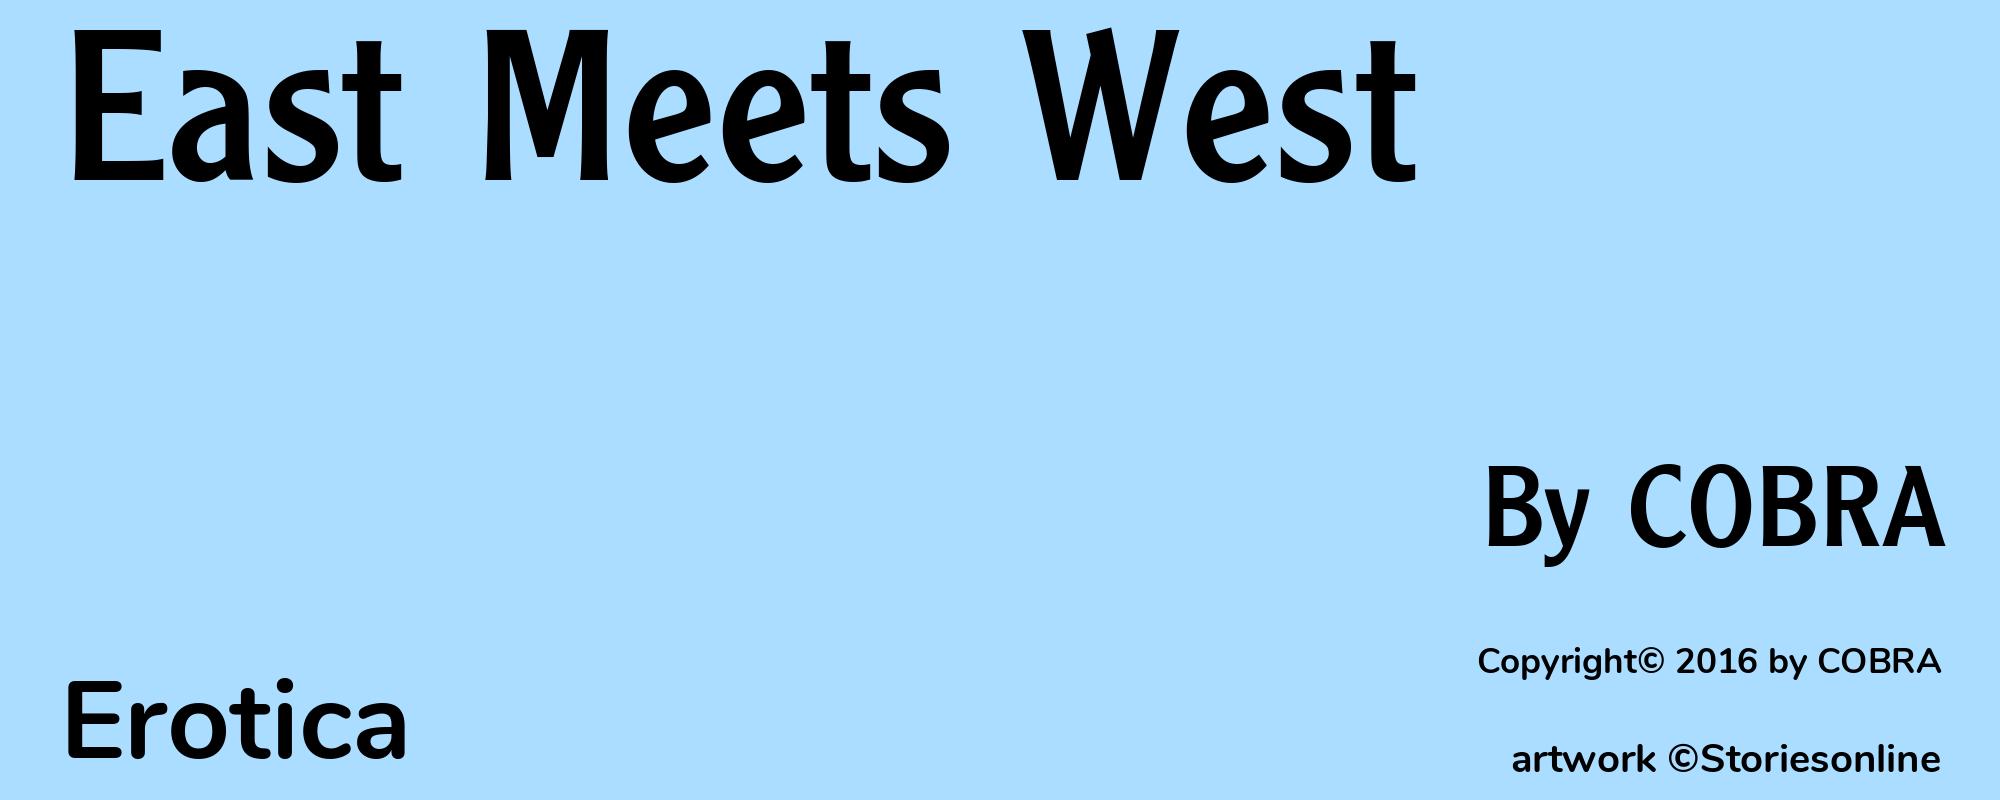 East Meets West - Cover